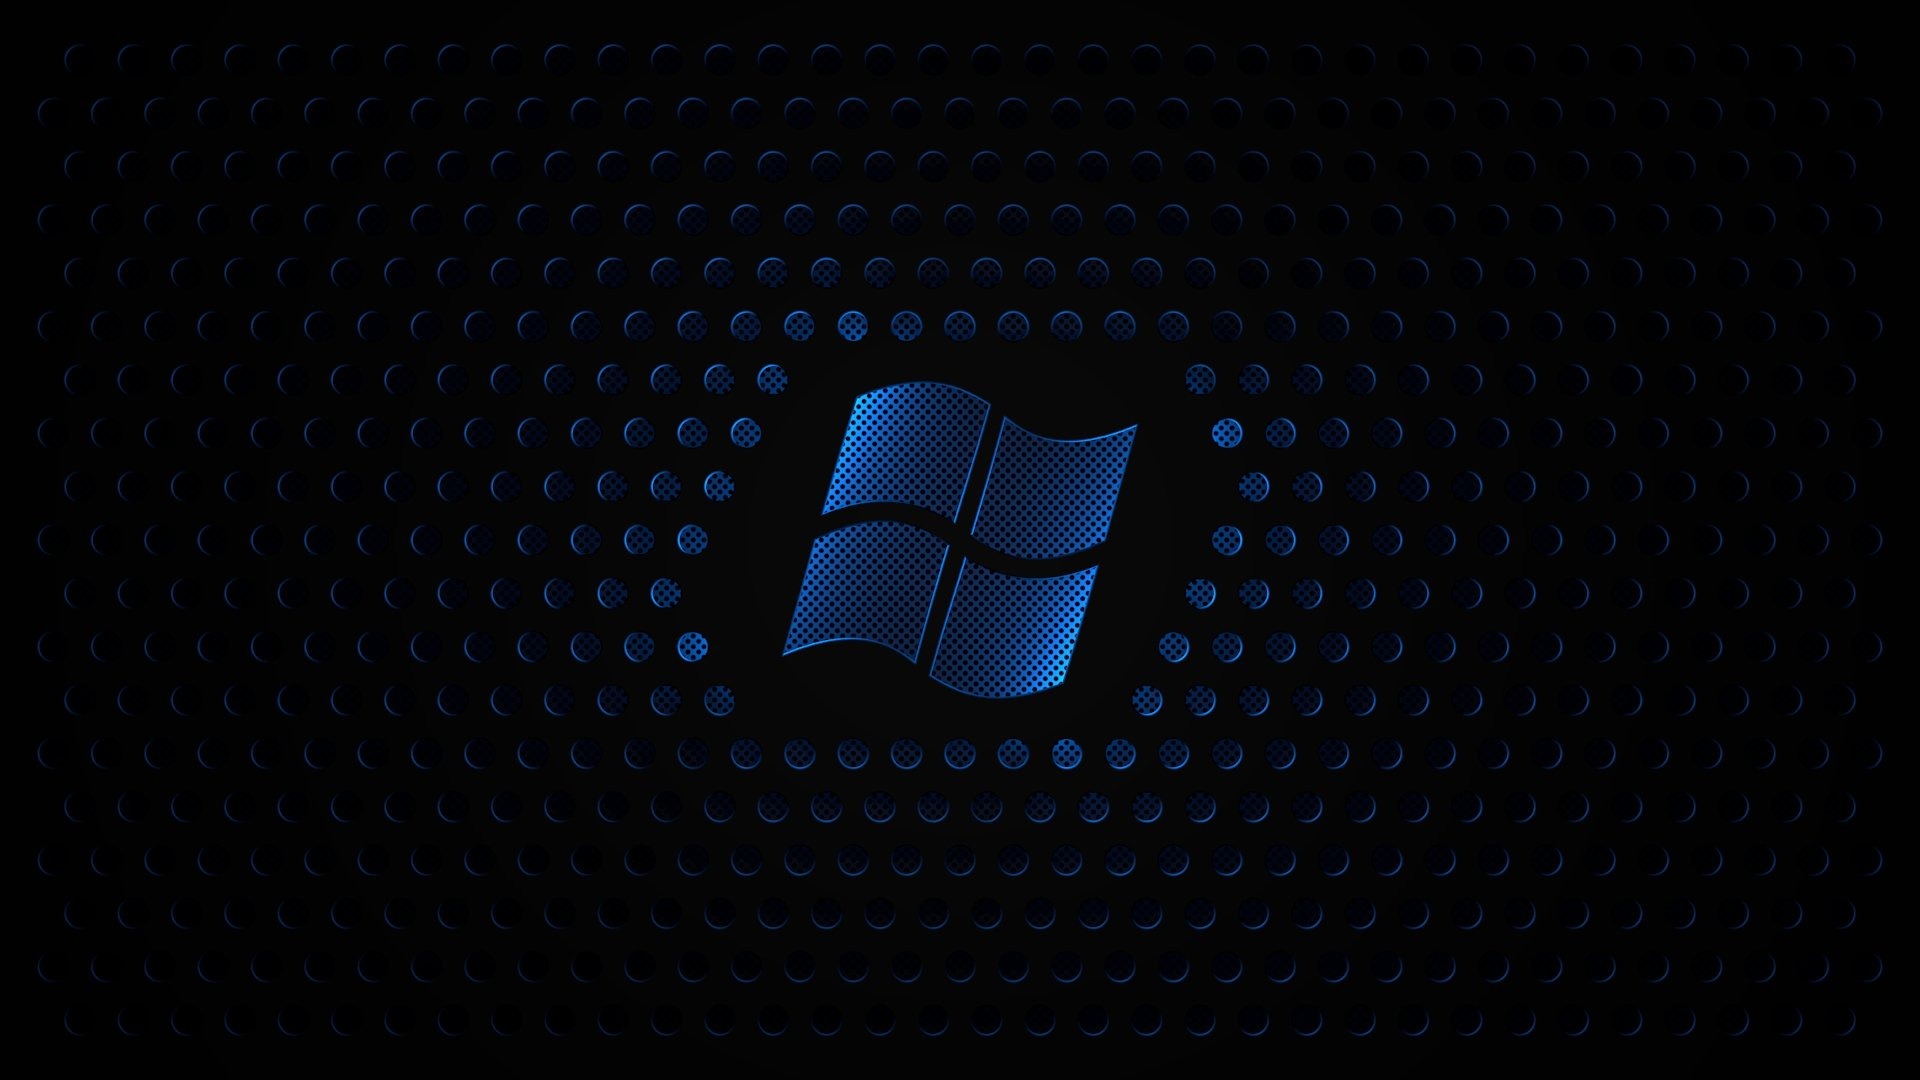  Blue Windows Sign With Black Background Wallpaper Full HD Wallpapers